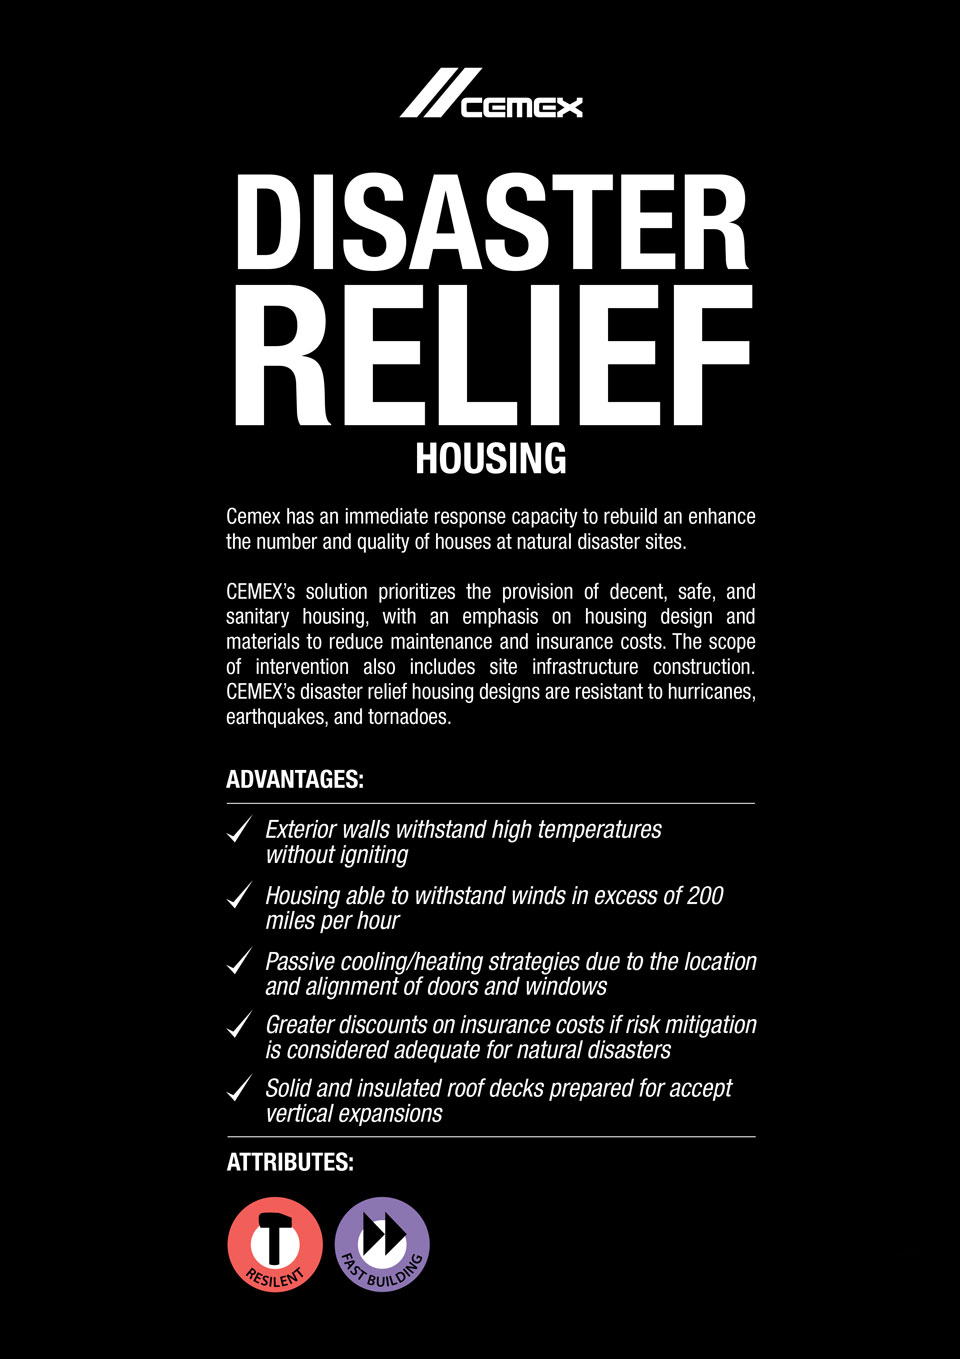 An image describing the advanages and characteristics of the Disaster Relief Housing solution.